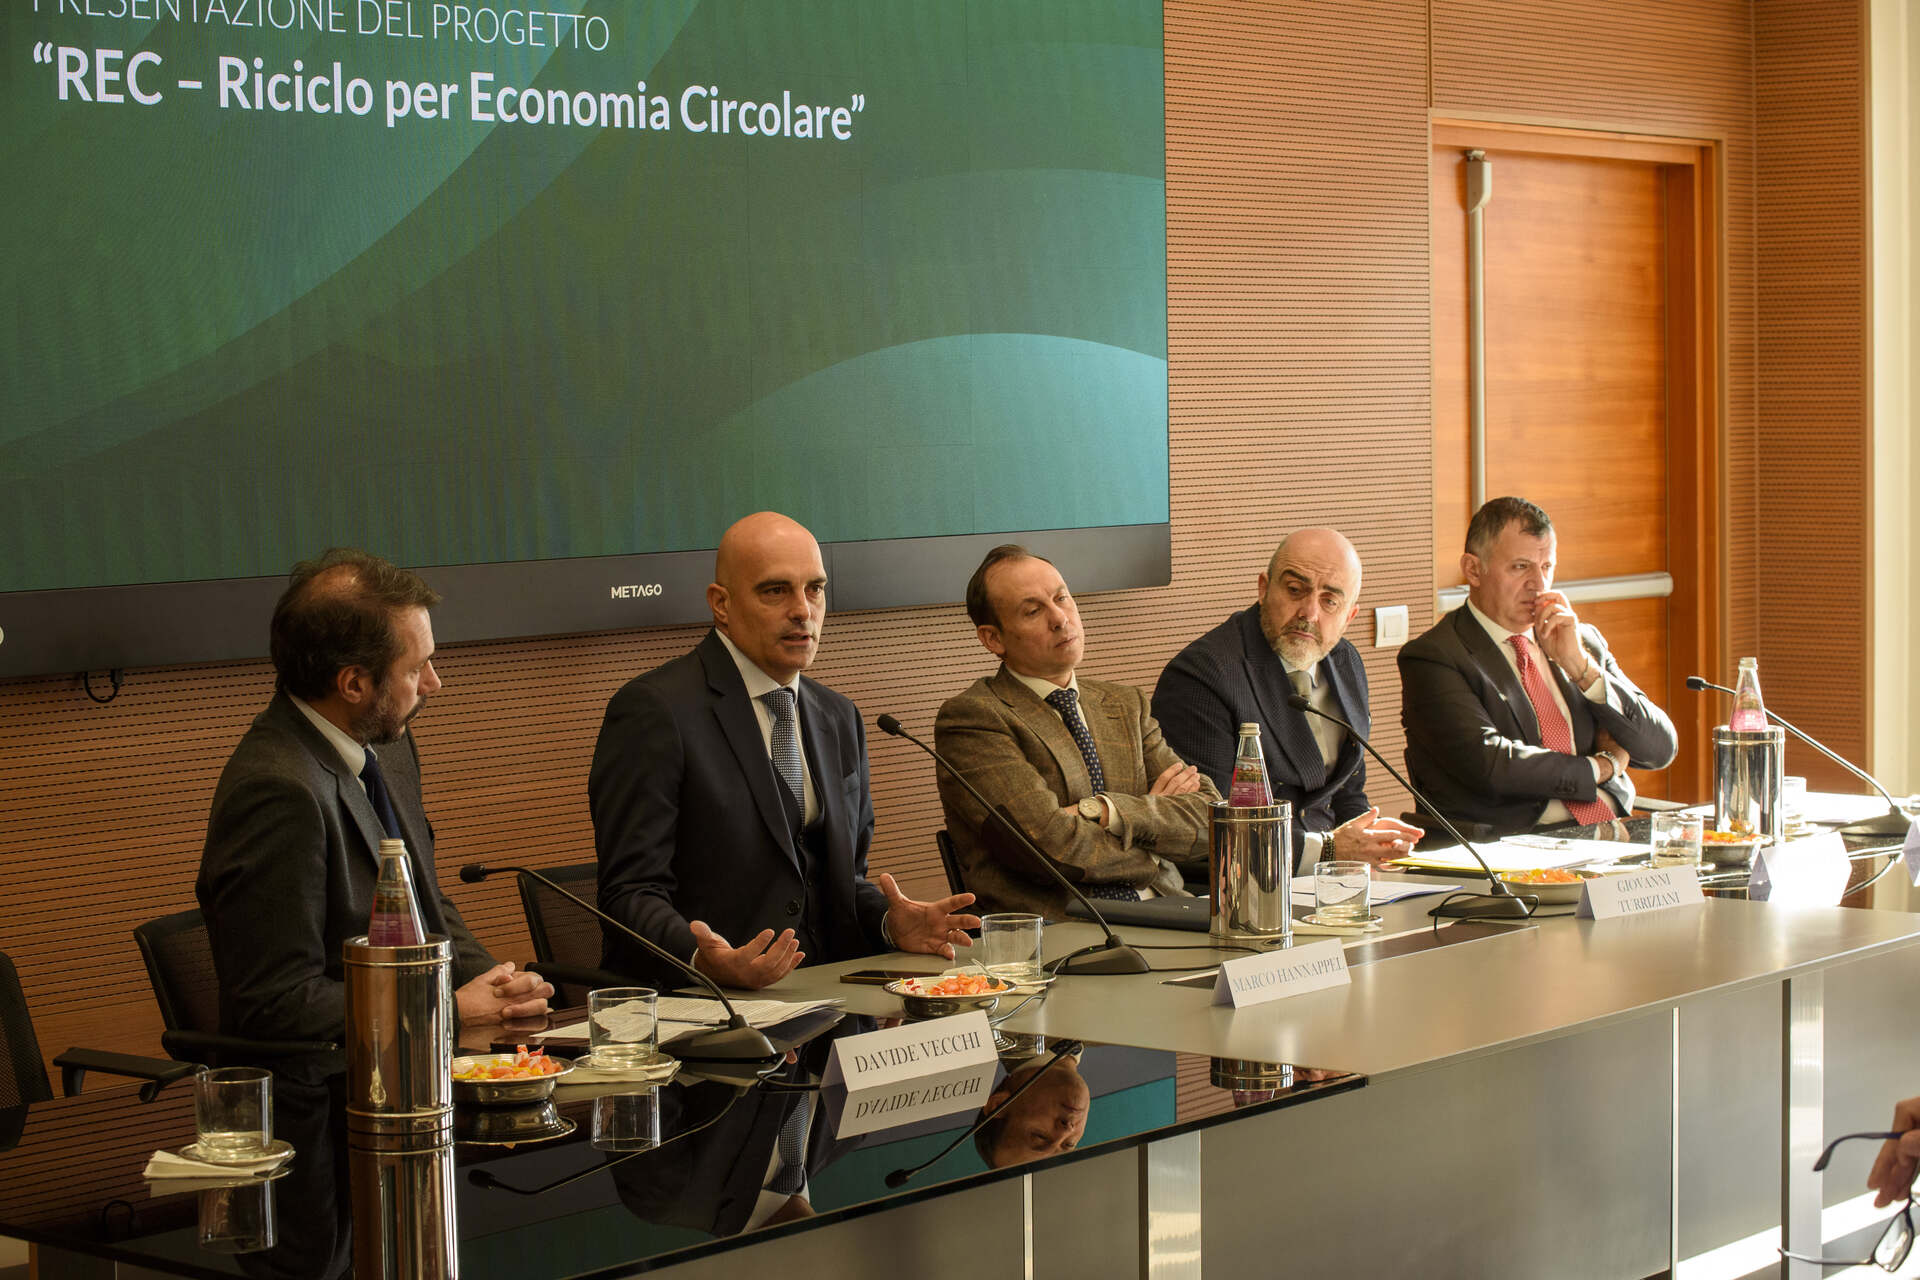 Philip Morris Italy: “REC – Recycling for Circular Economy” preses konference